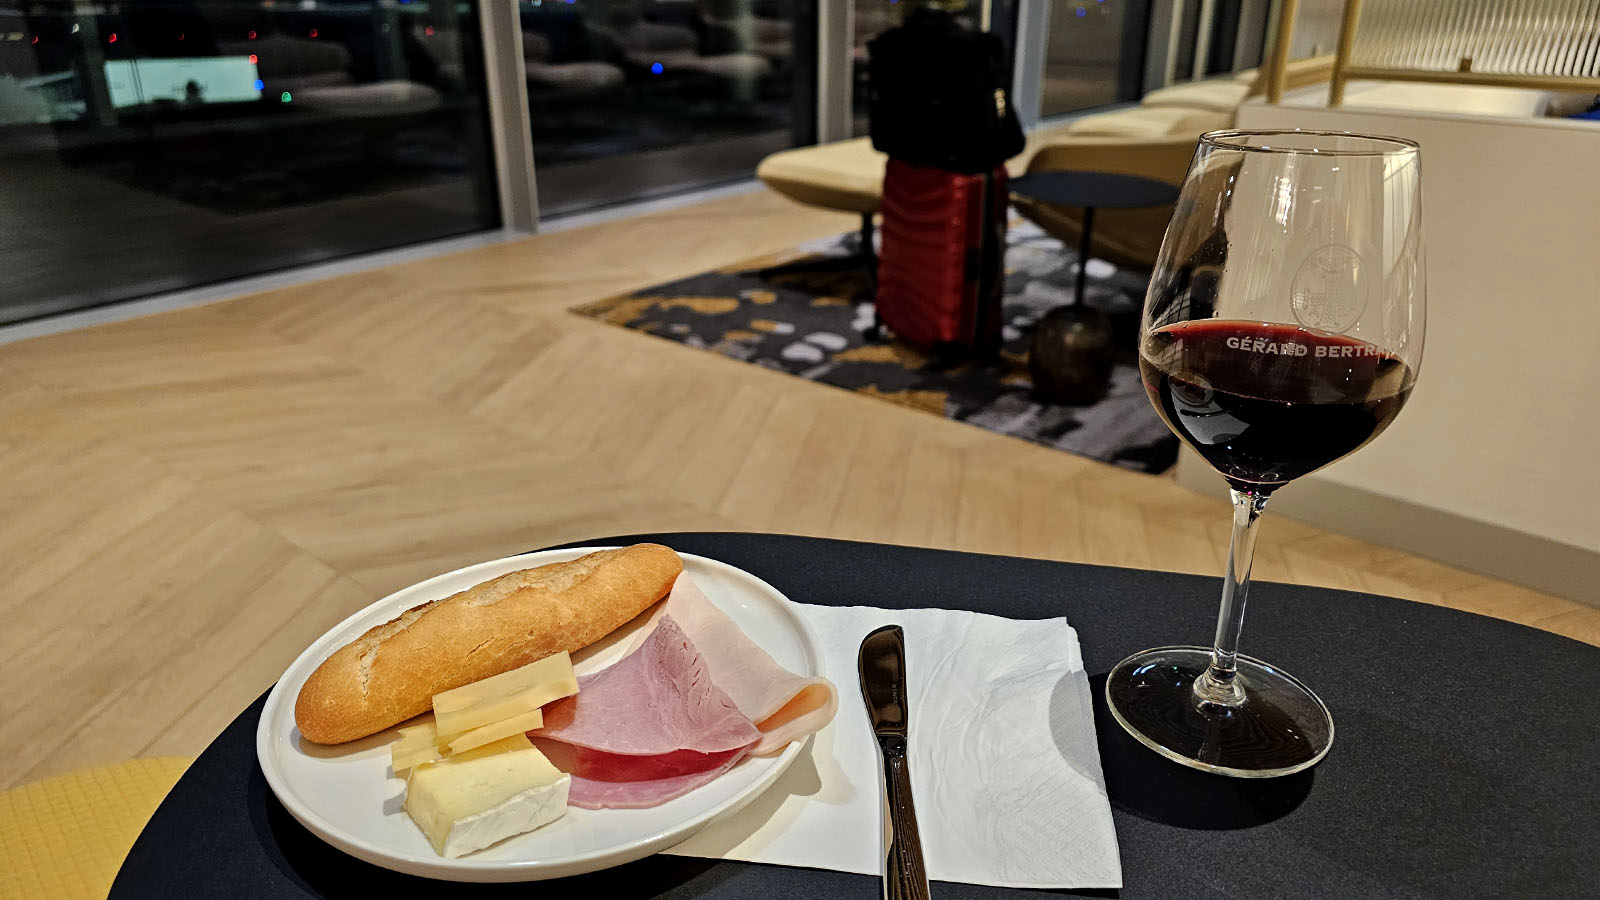 Charcuterie plate at the Star Alliance Lounge, Paris